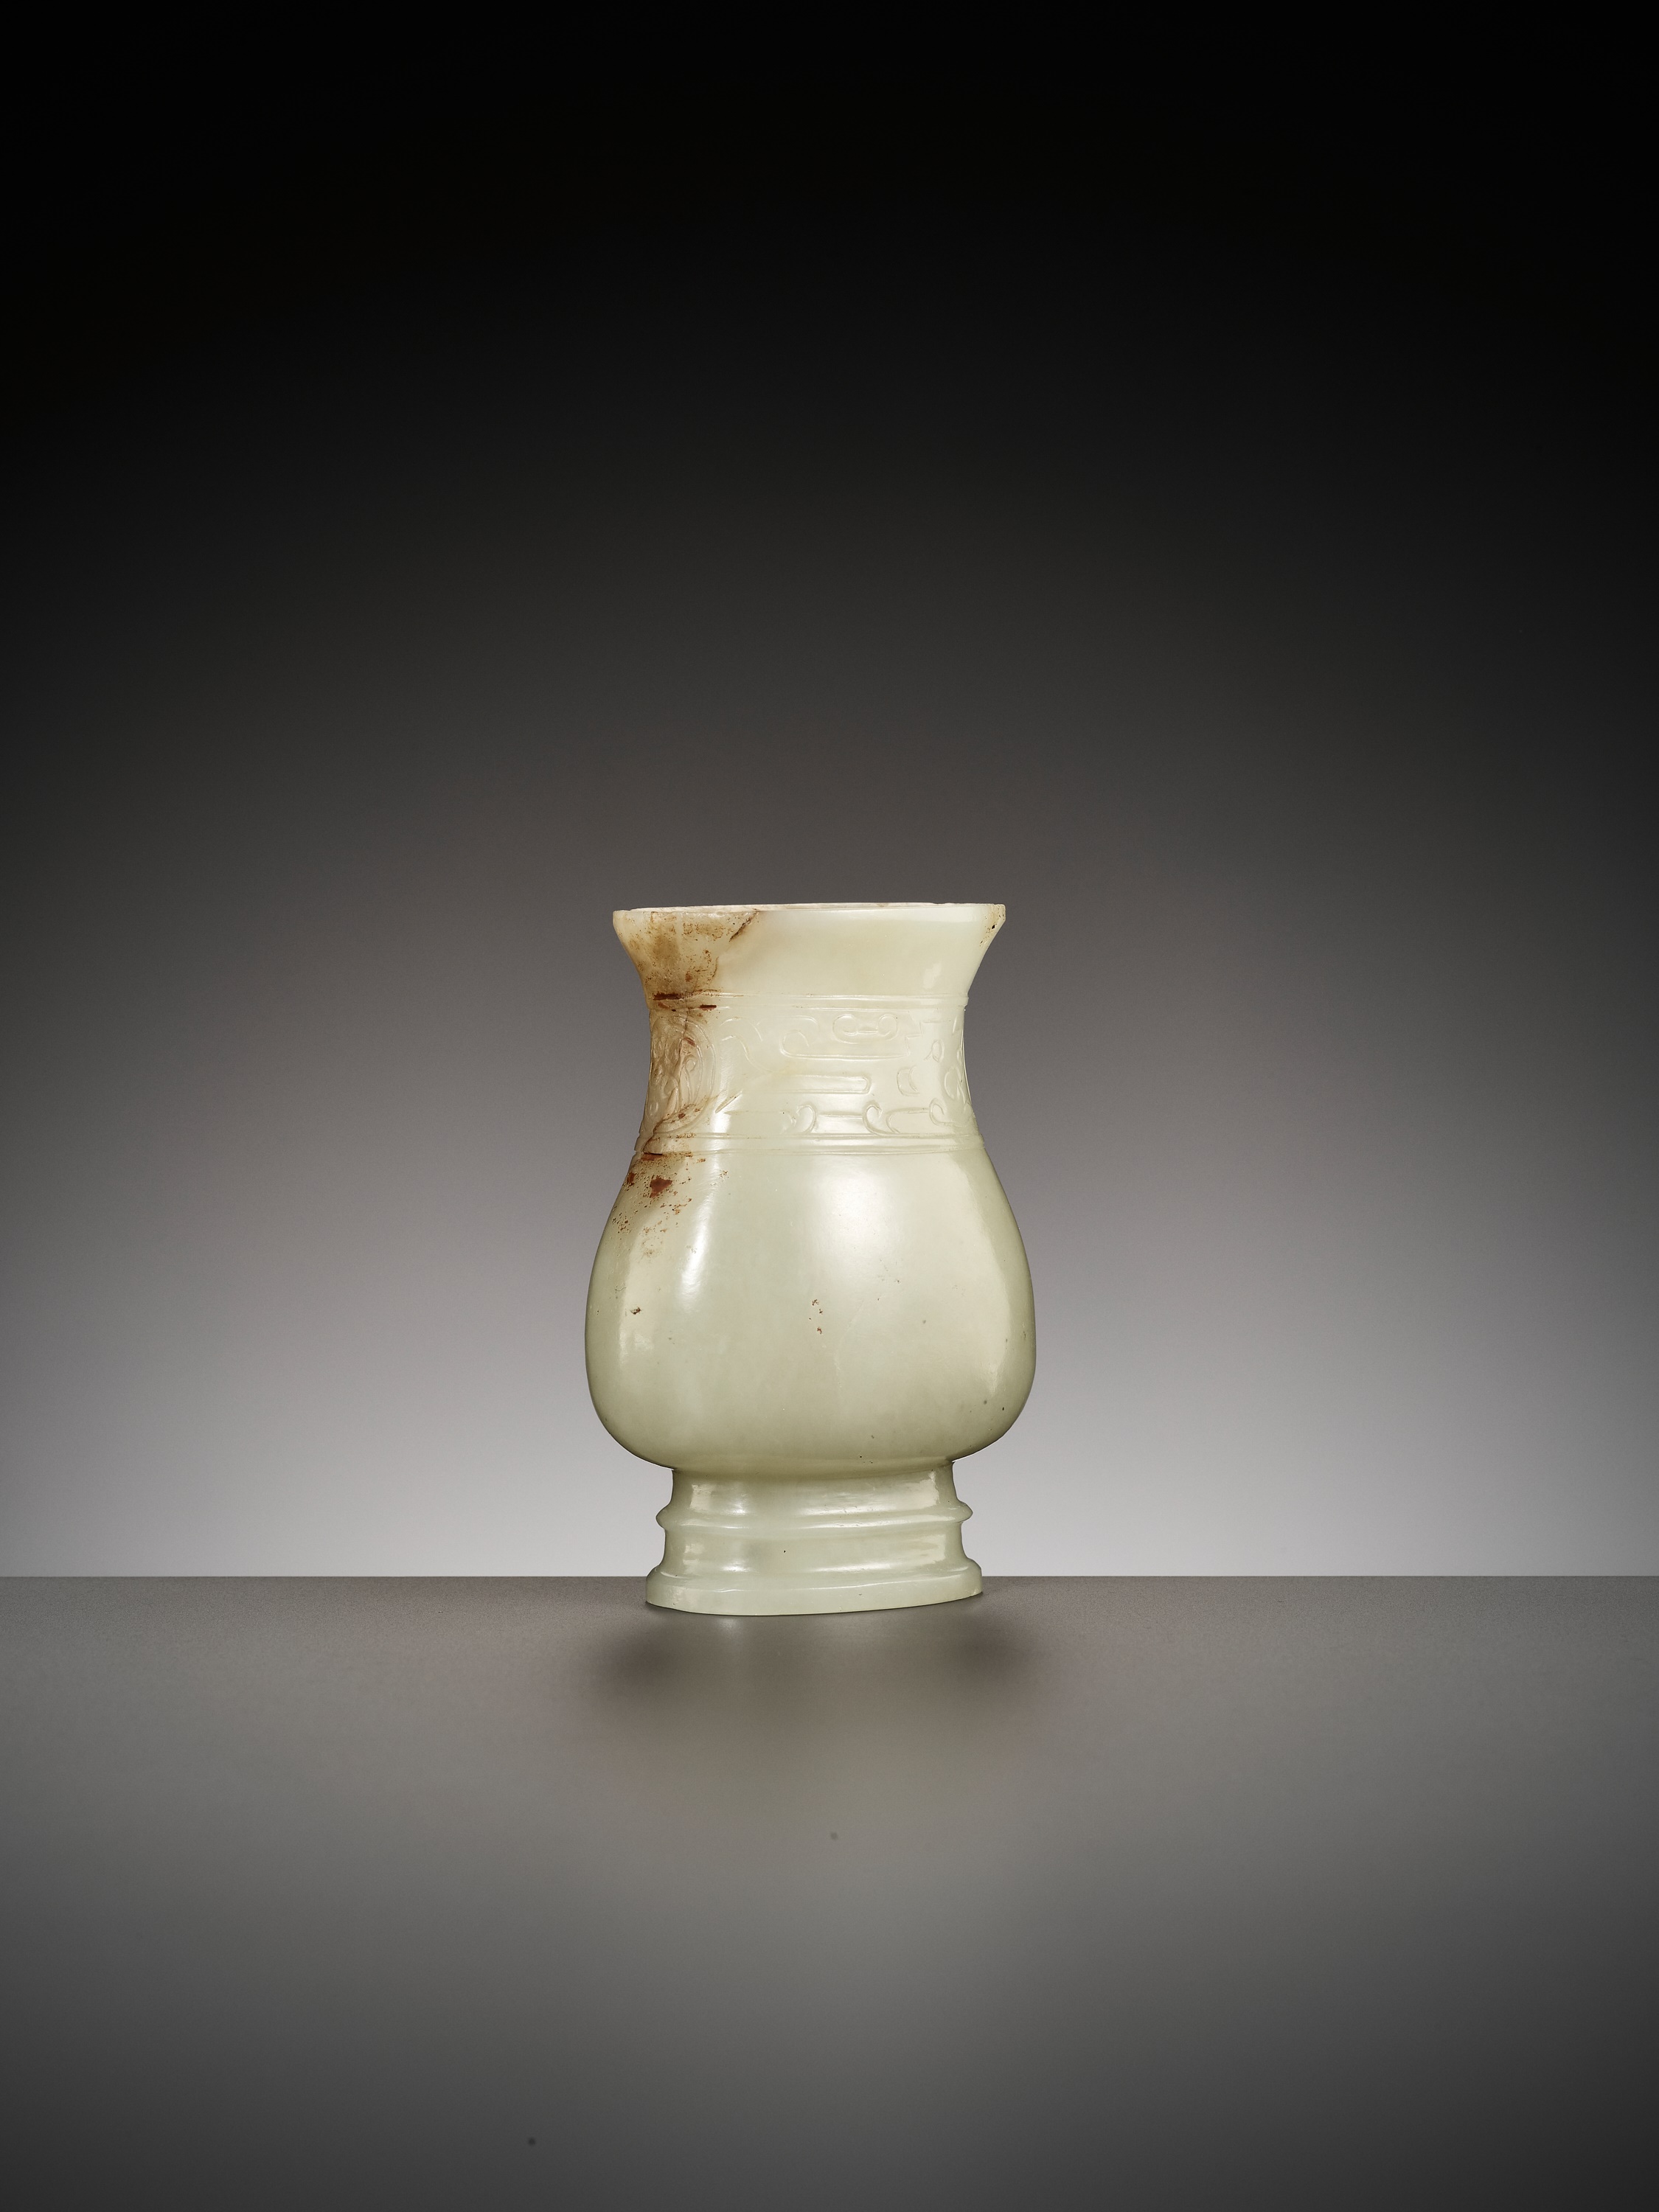 A RARE ARCHAISTIC 'SHANG BRONZE IMITATION' JADE VESSEL, ZHI, LATE SONG TO EARLY MING DYNASTY - Image 9 of 19